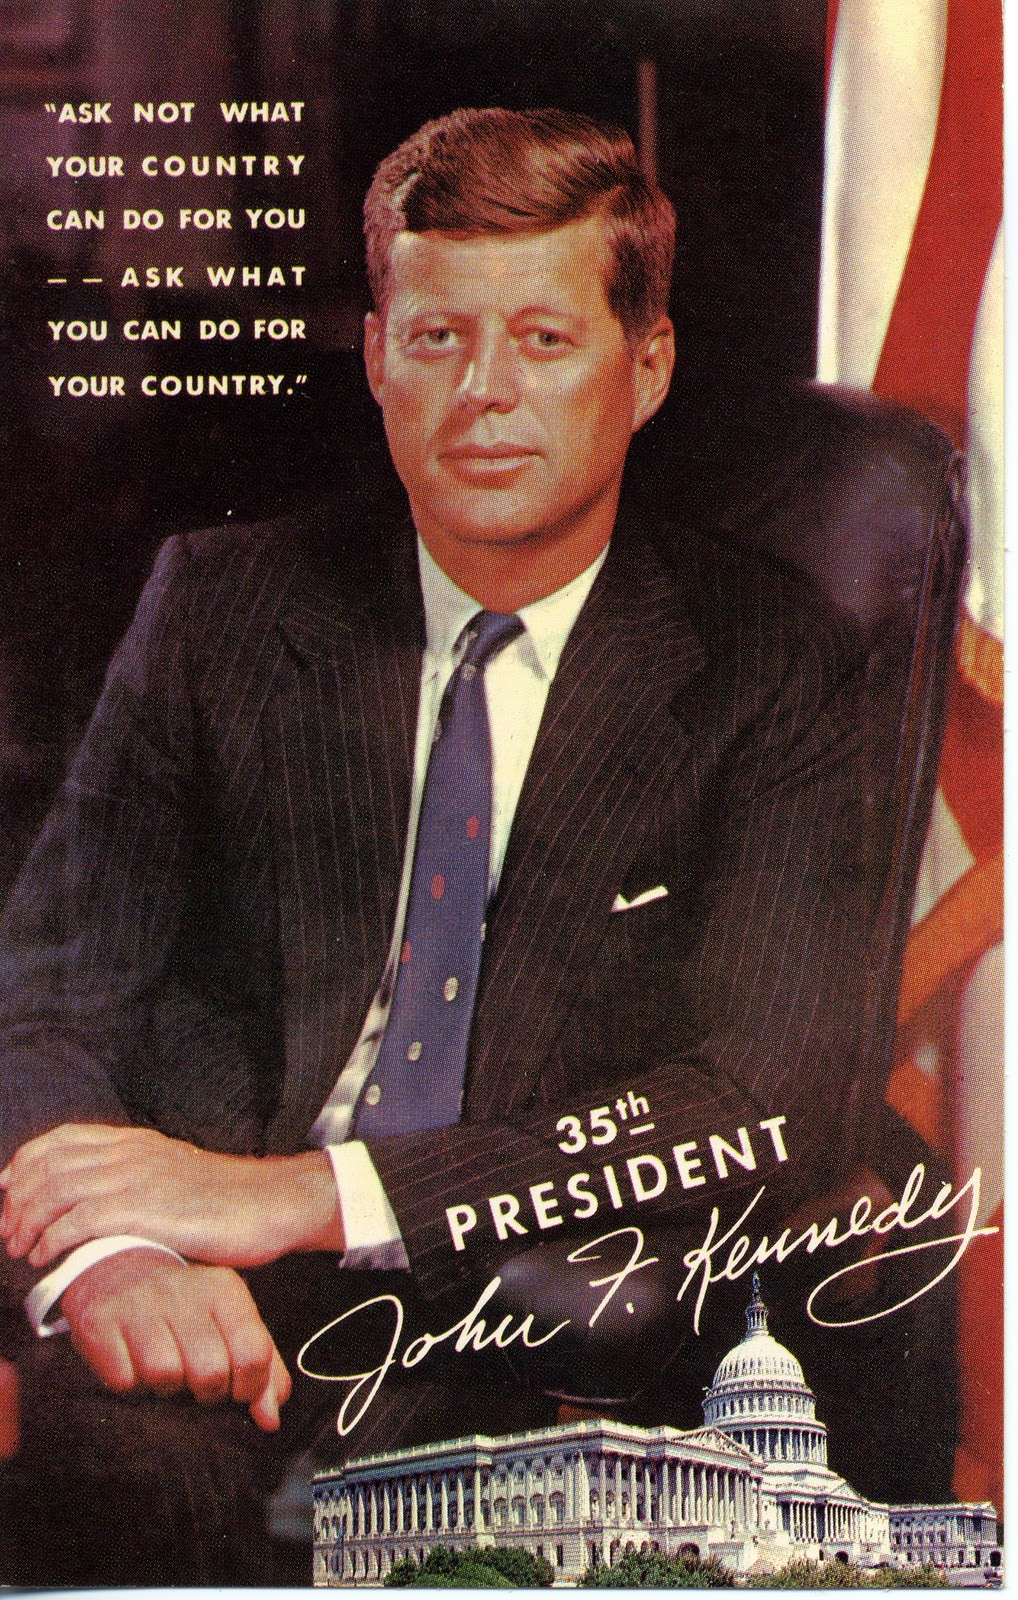 John F Kennedy Quotes About Unions. QuotesGram